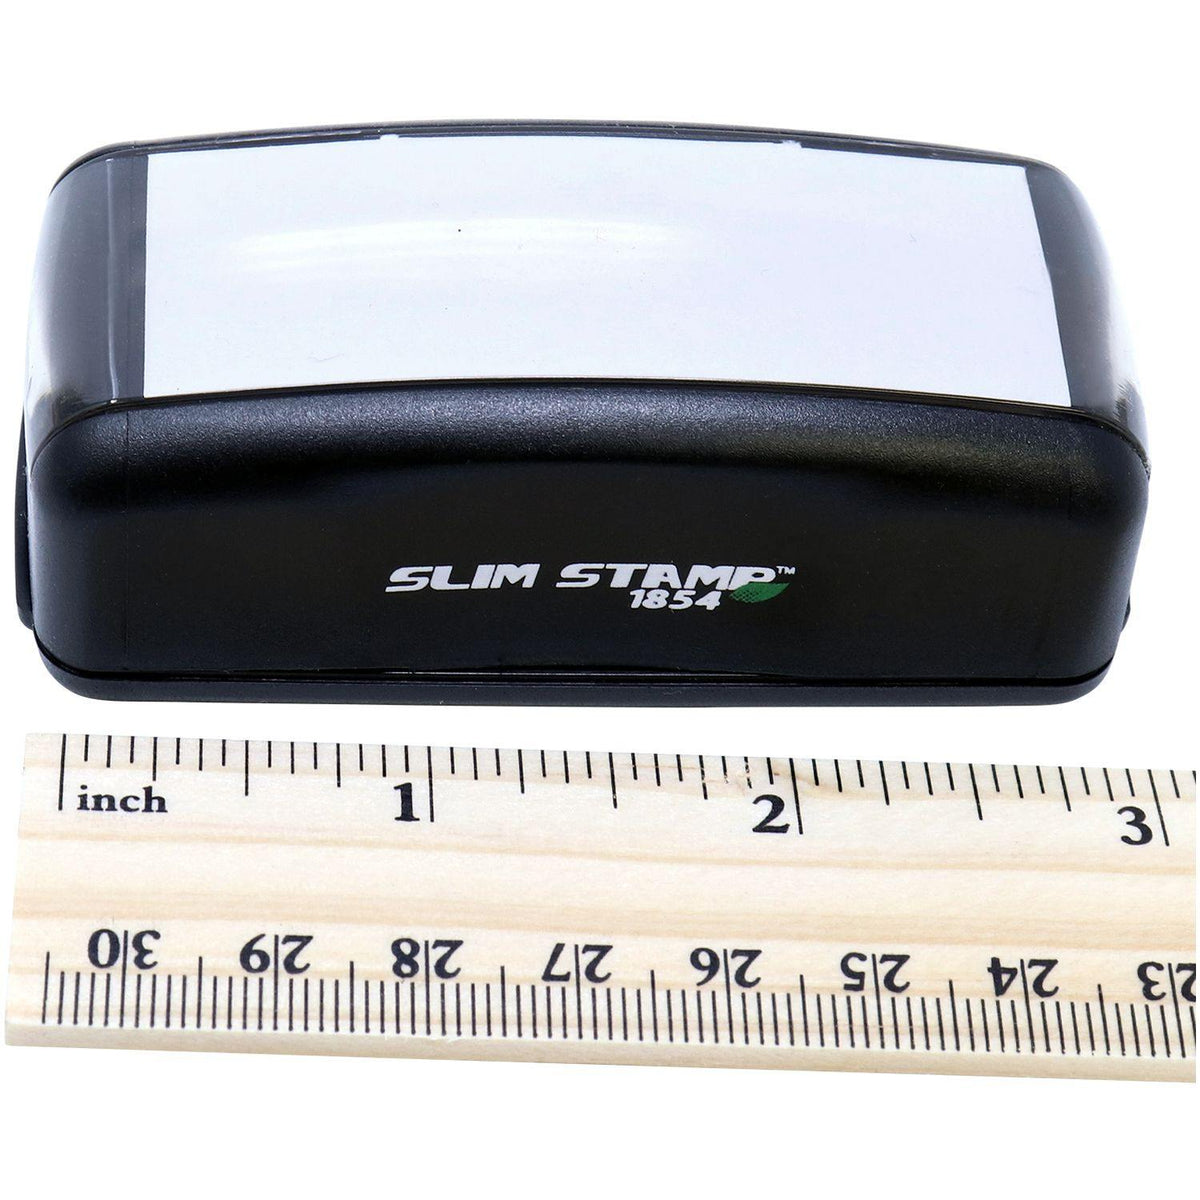 Measurement Large Pre Inked Parent Signature Required Stamp with Ruler